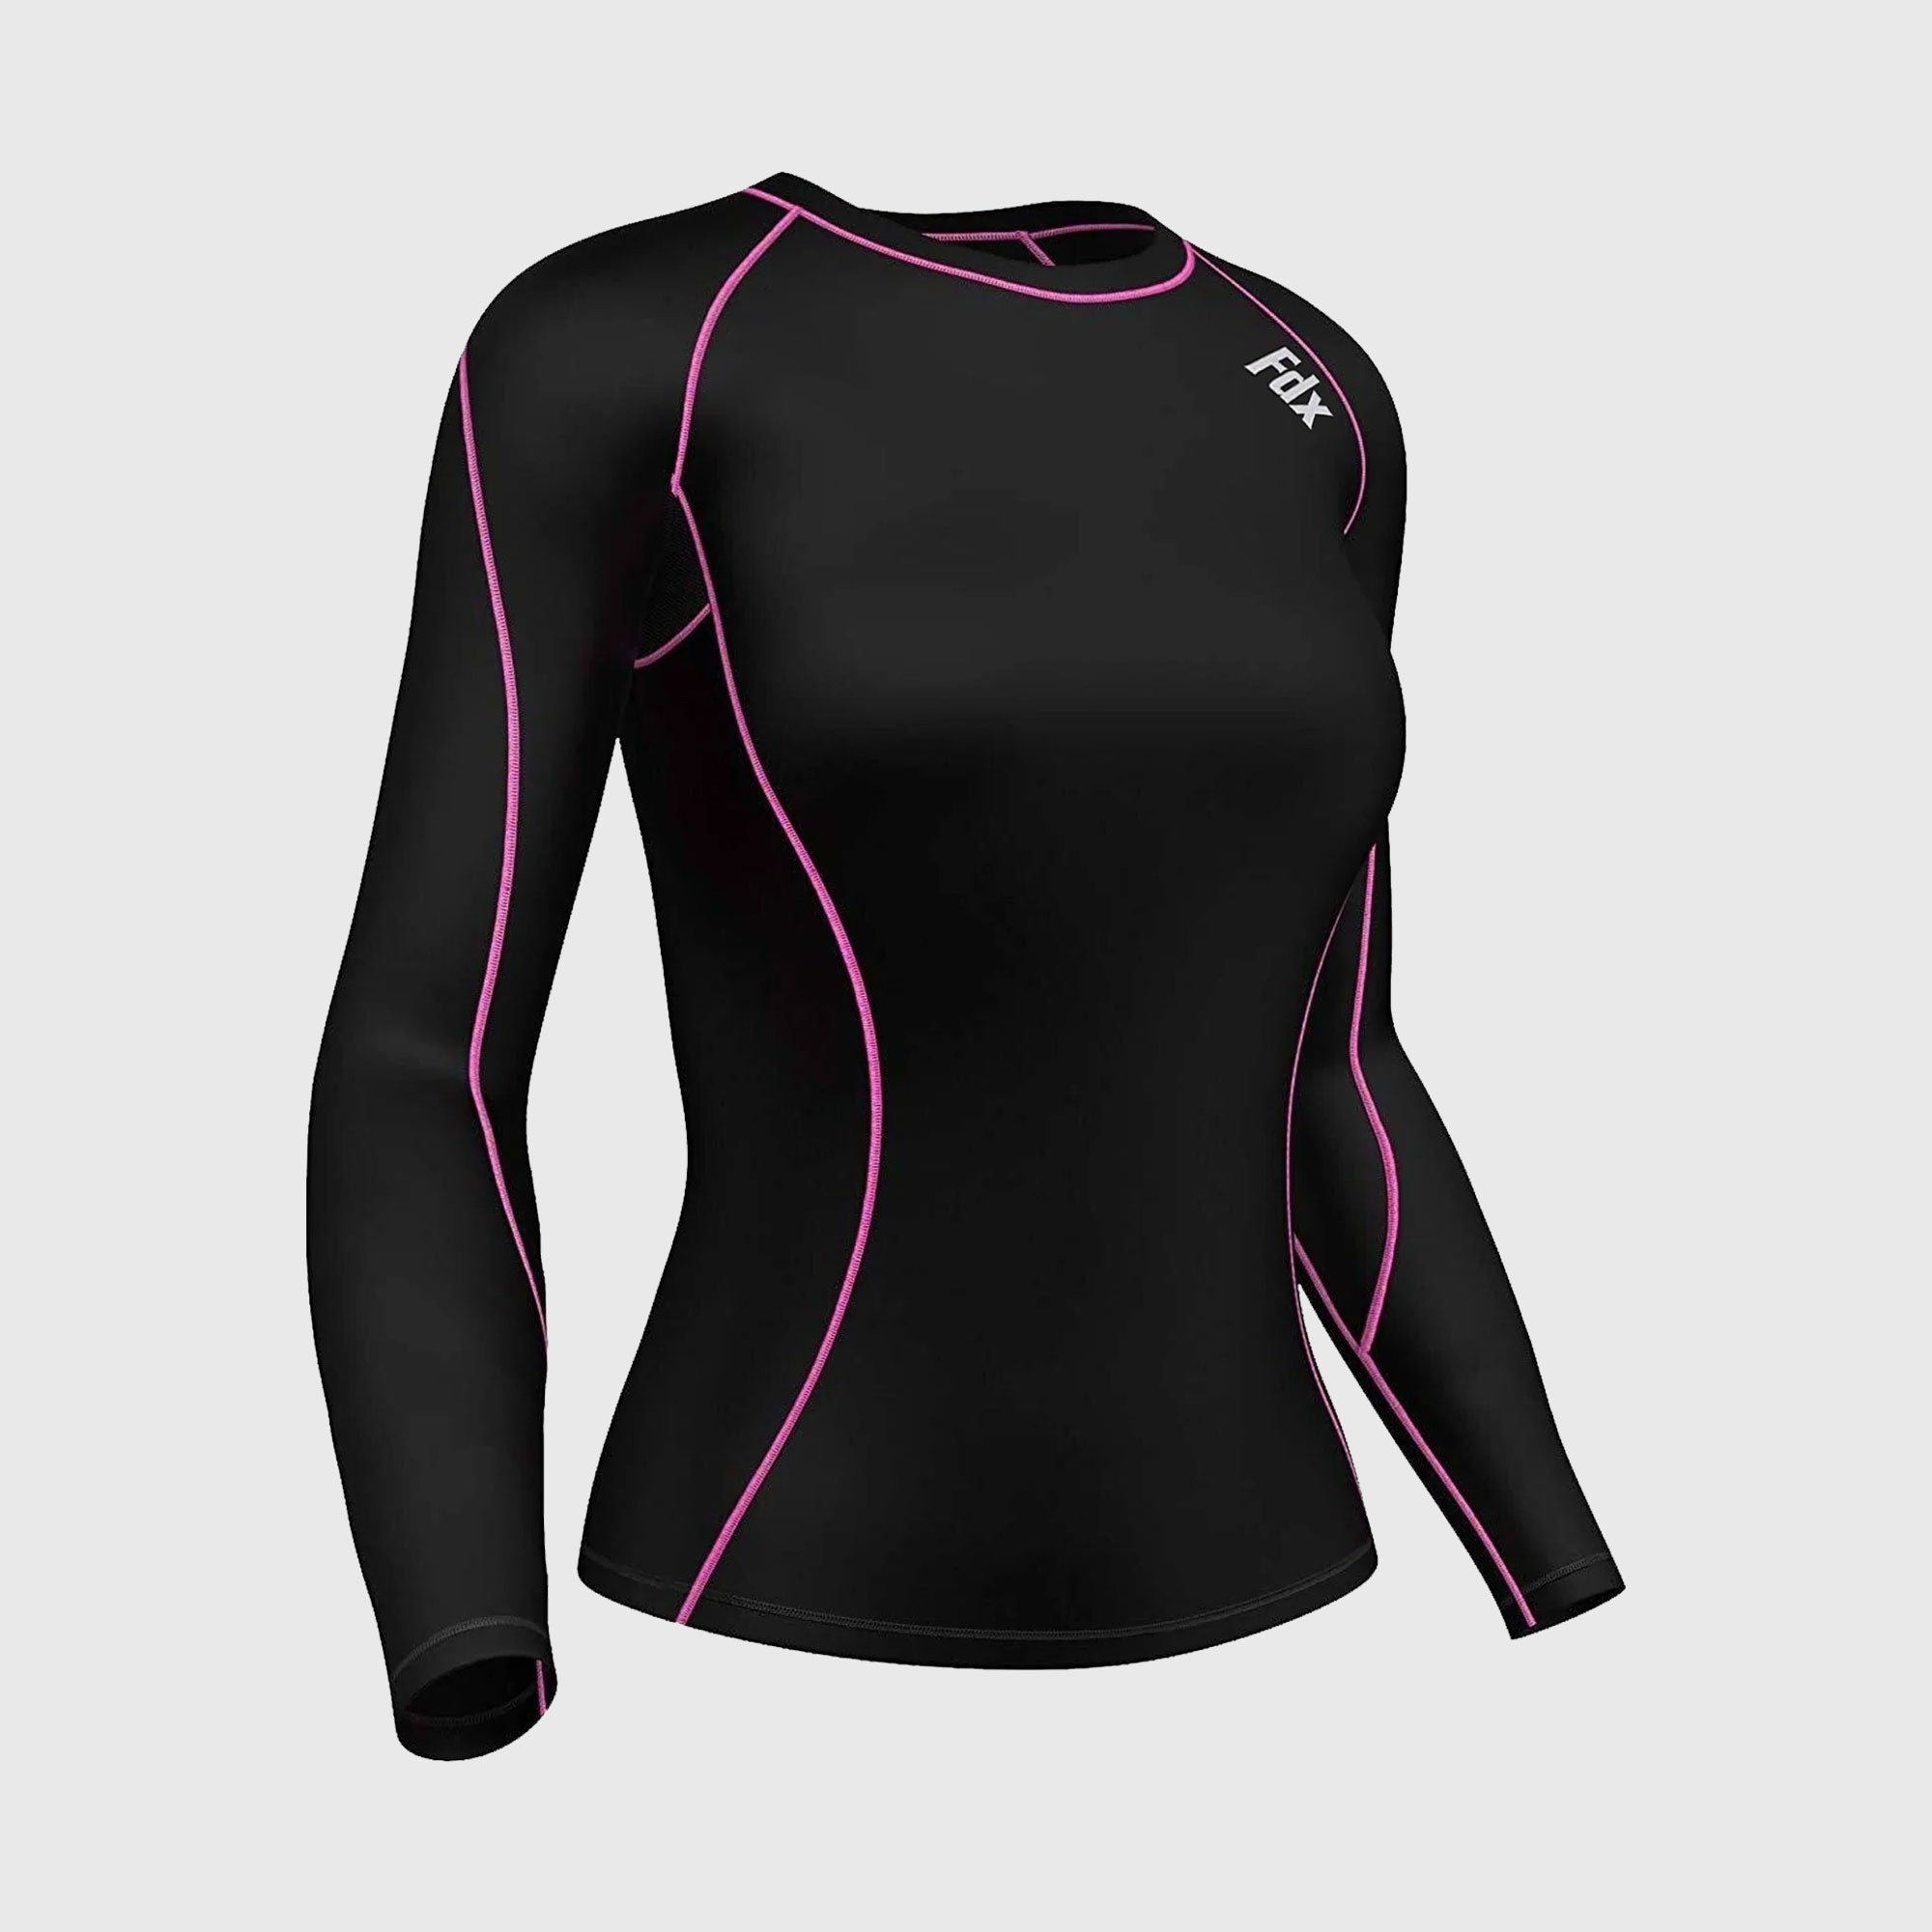 Fdx Women's Pink Black Long Sleeve Ultralight Compression Top Running Gym Workout Wear Rash Guard Stretchable Breathable Quick Dry - Monarch